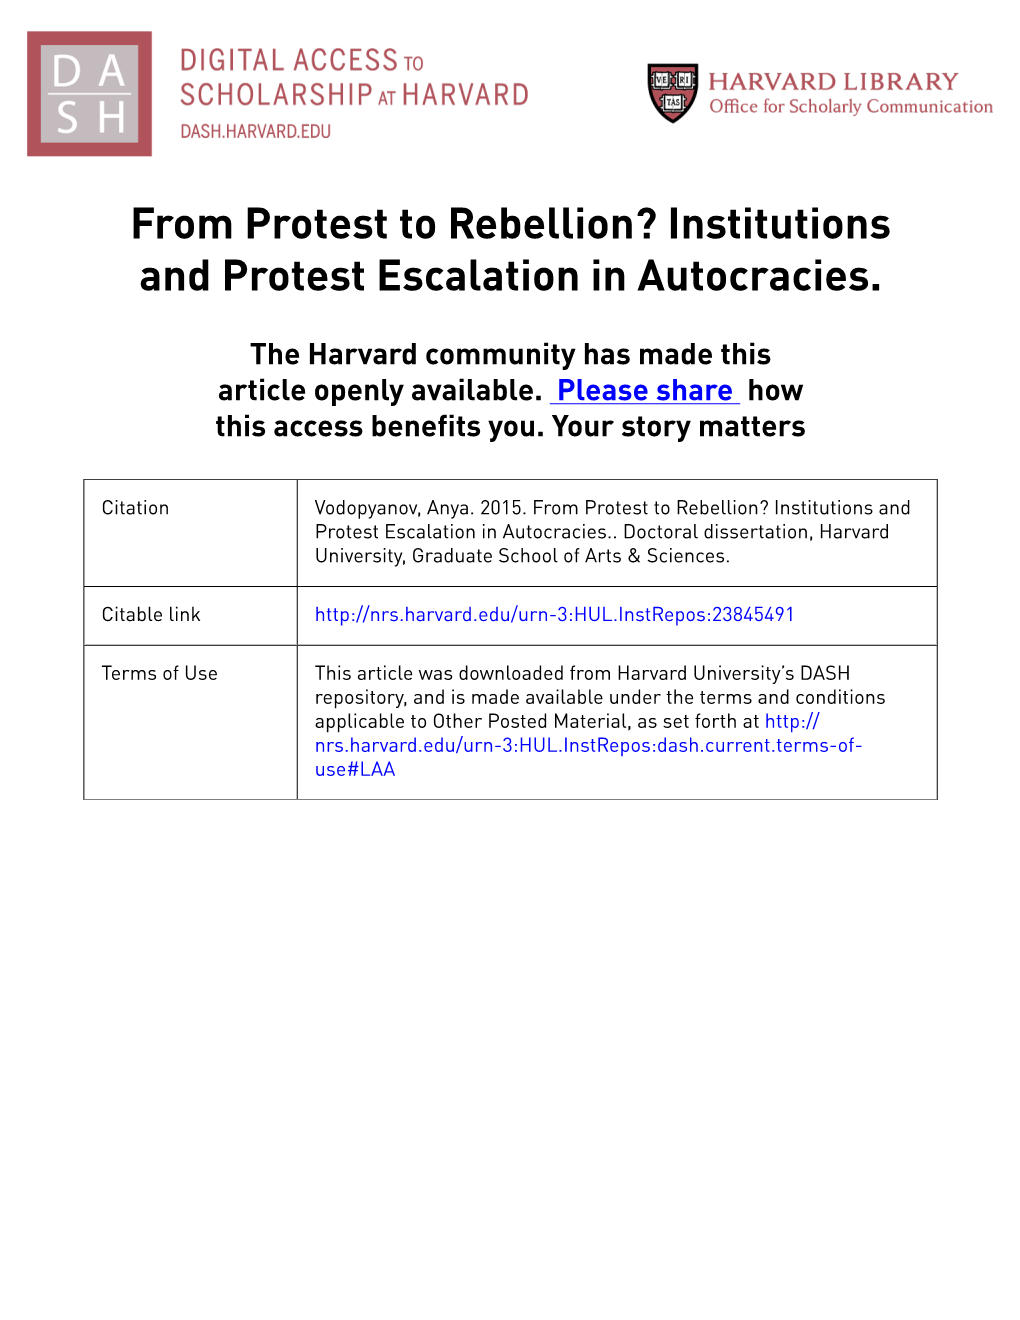 From Protest to Rebellion? Institutions and Protest Escalation in Autocracies